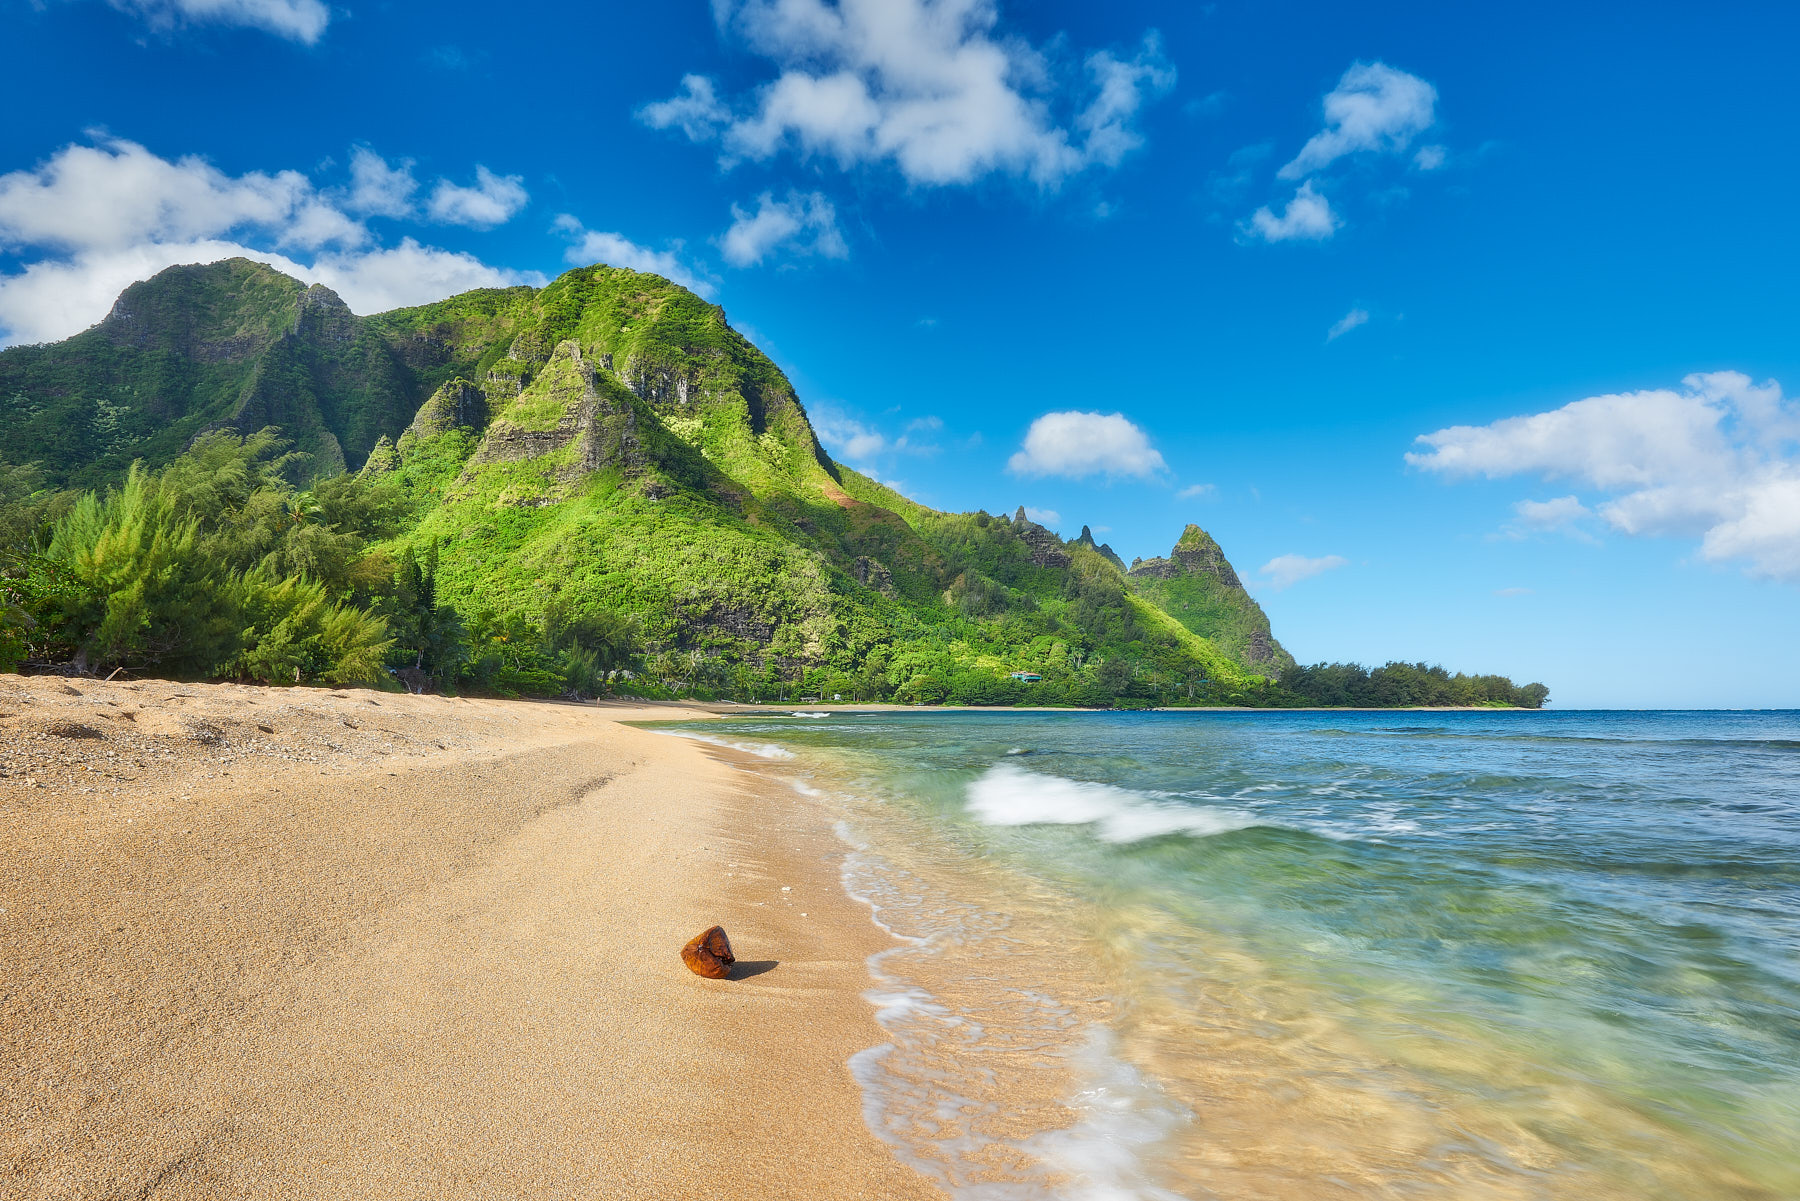 fine art photograph of the beautiful tunnels beach (also known as Maluaka) on the island of Kauai with a coconut found washing up in the tide along the beach